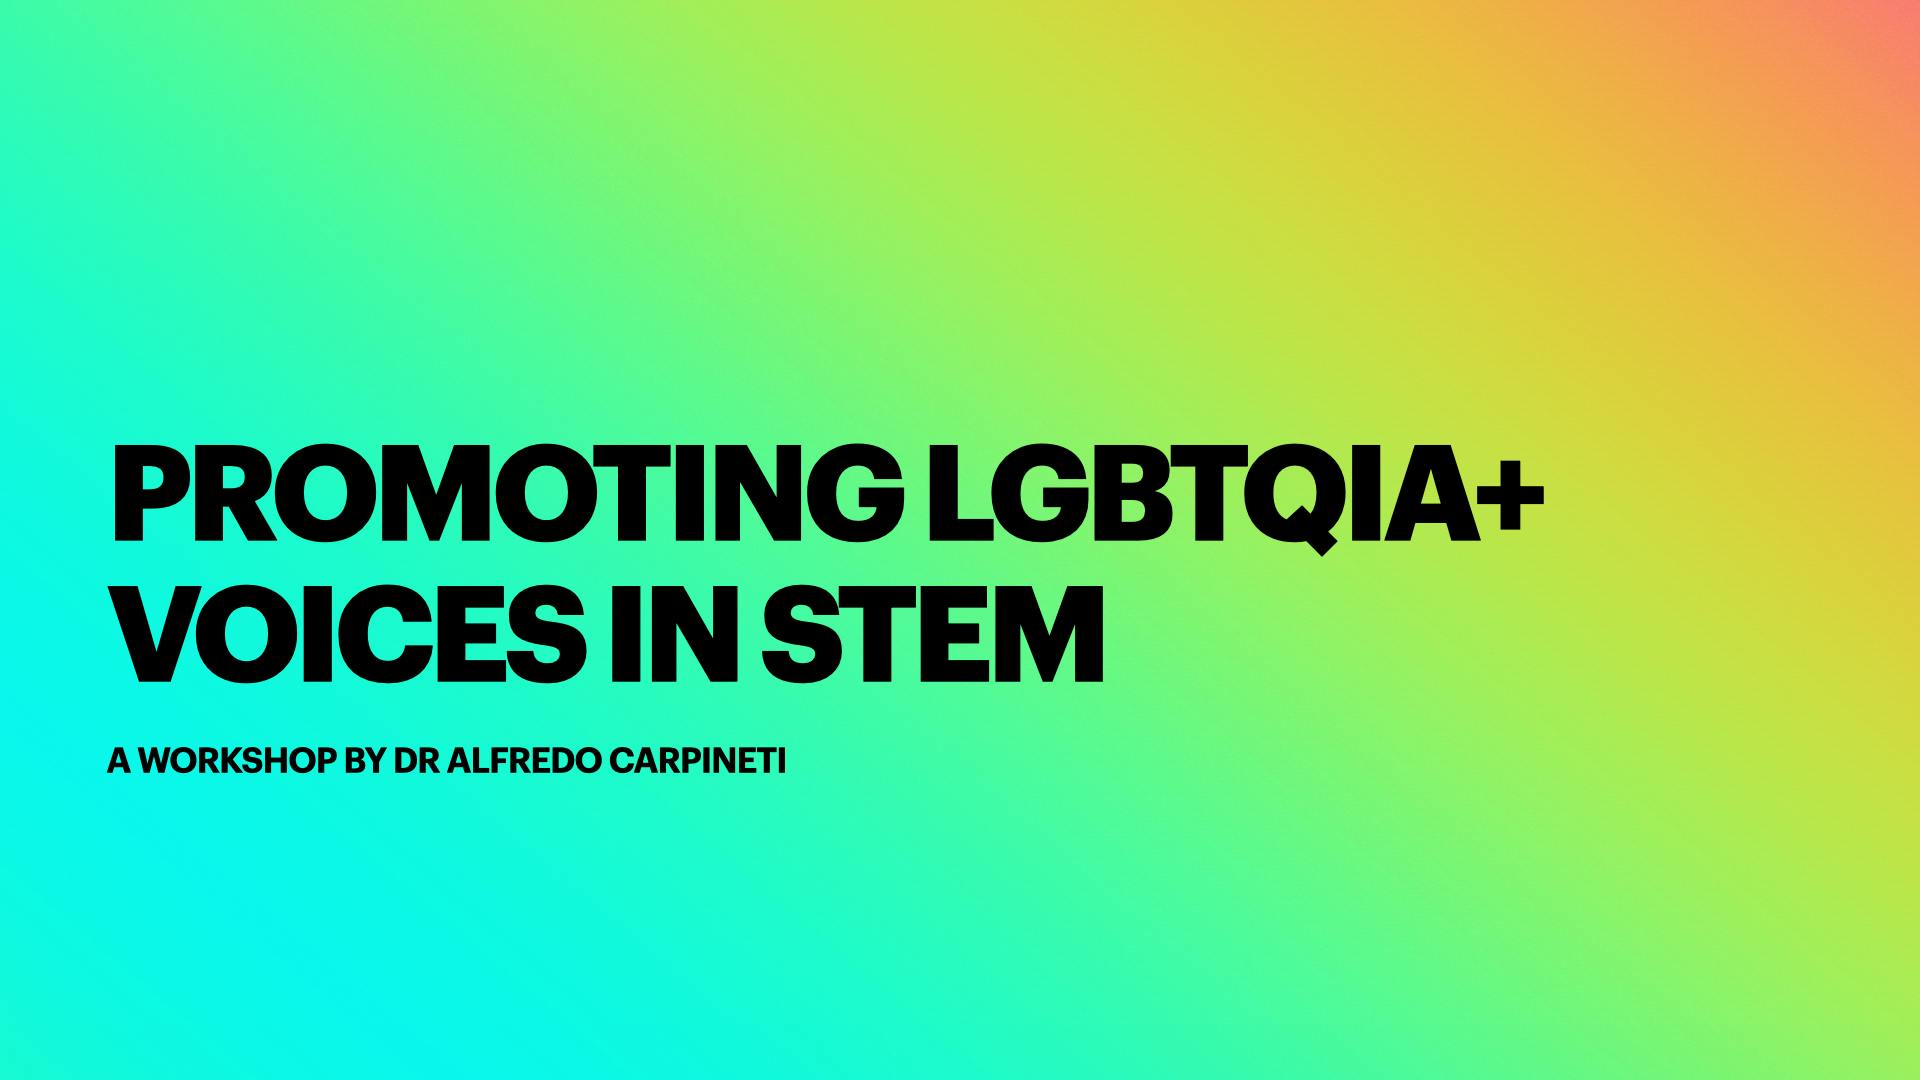 Promoting LGBTQIA+ Voices in STEM: A workshop by Dr Alfredo Carpineti